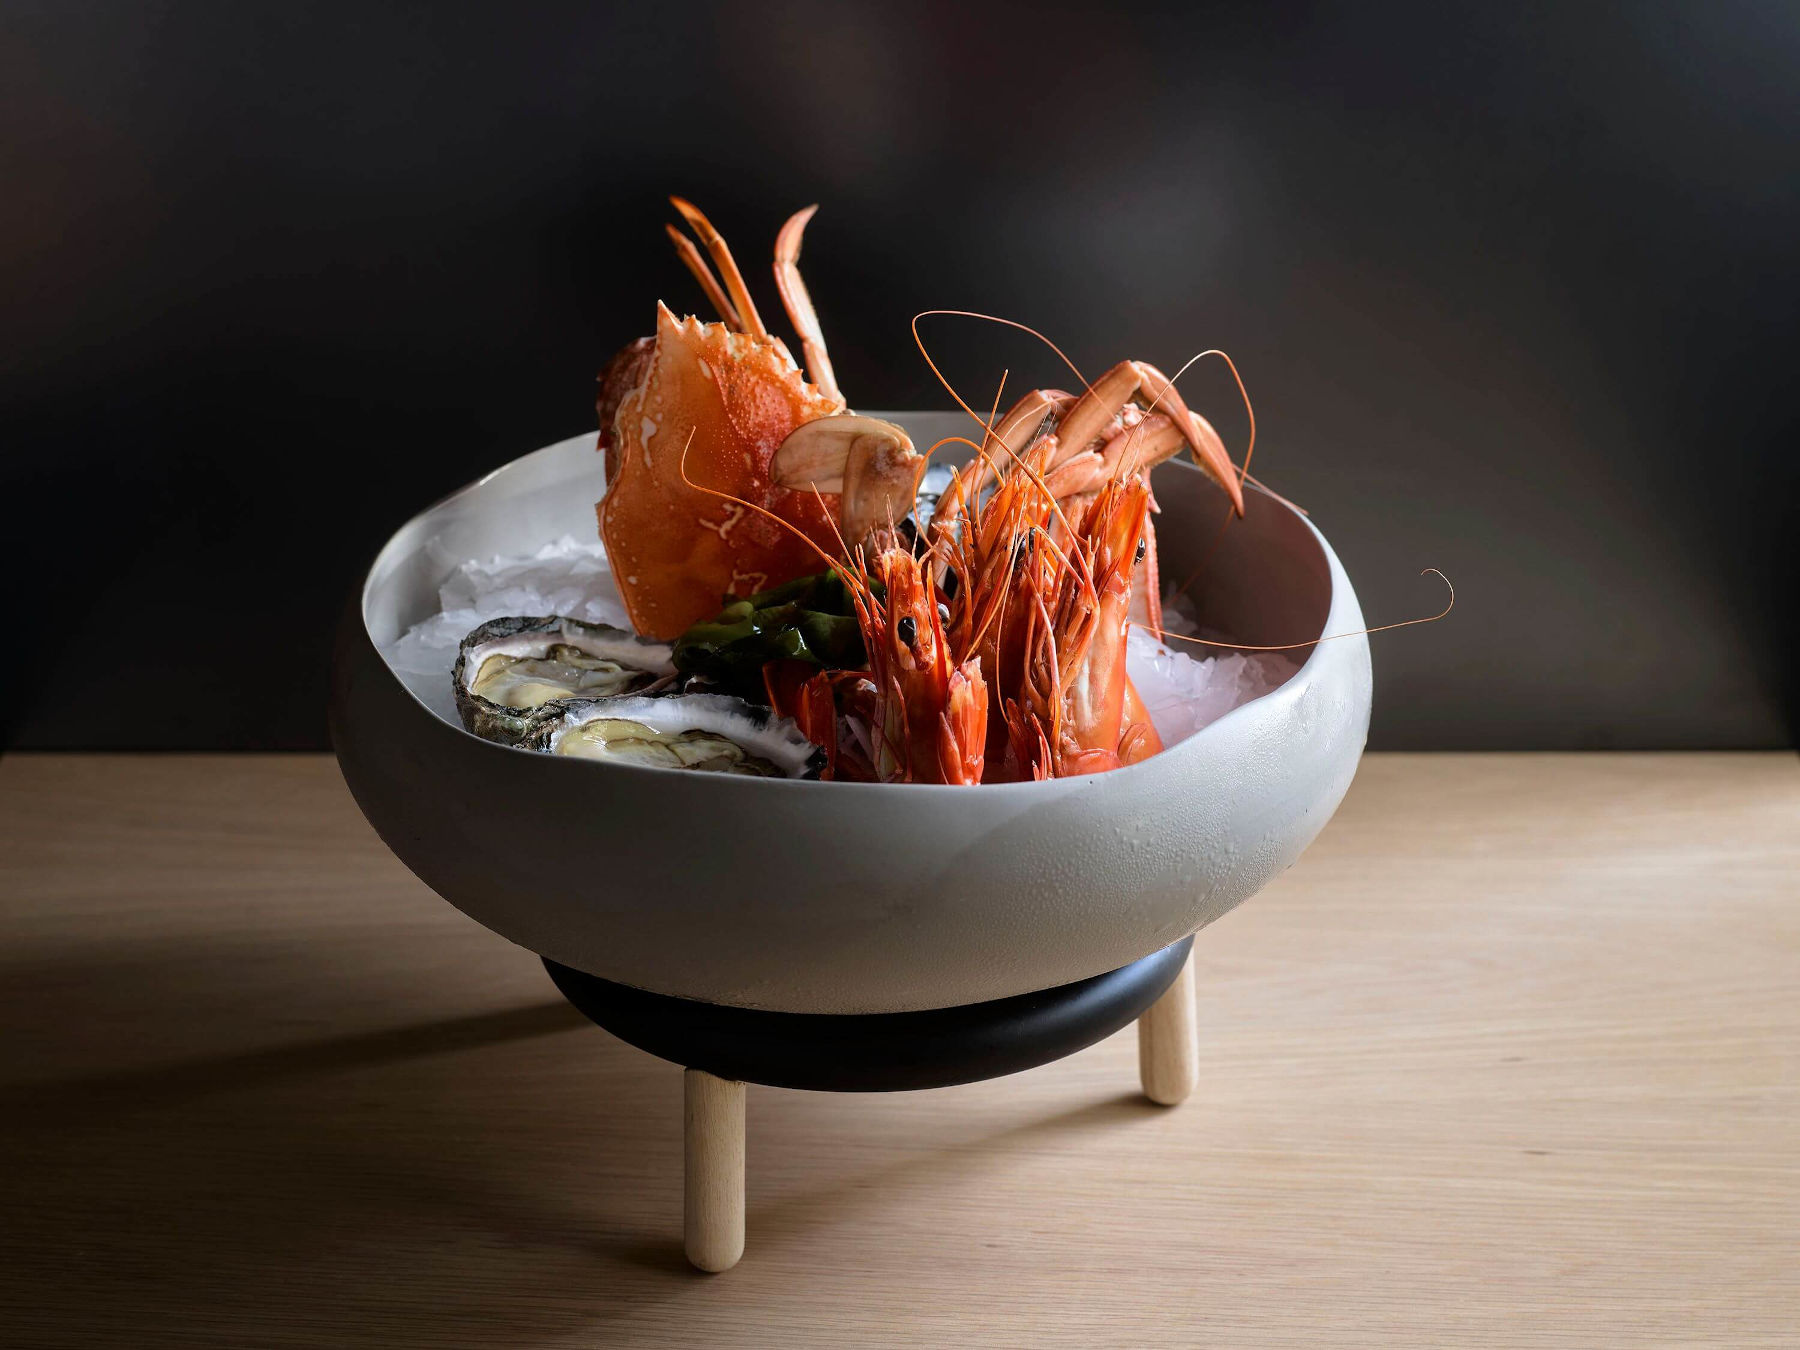 A prawns dish being served with oysters for a customer
